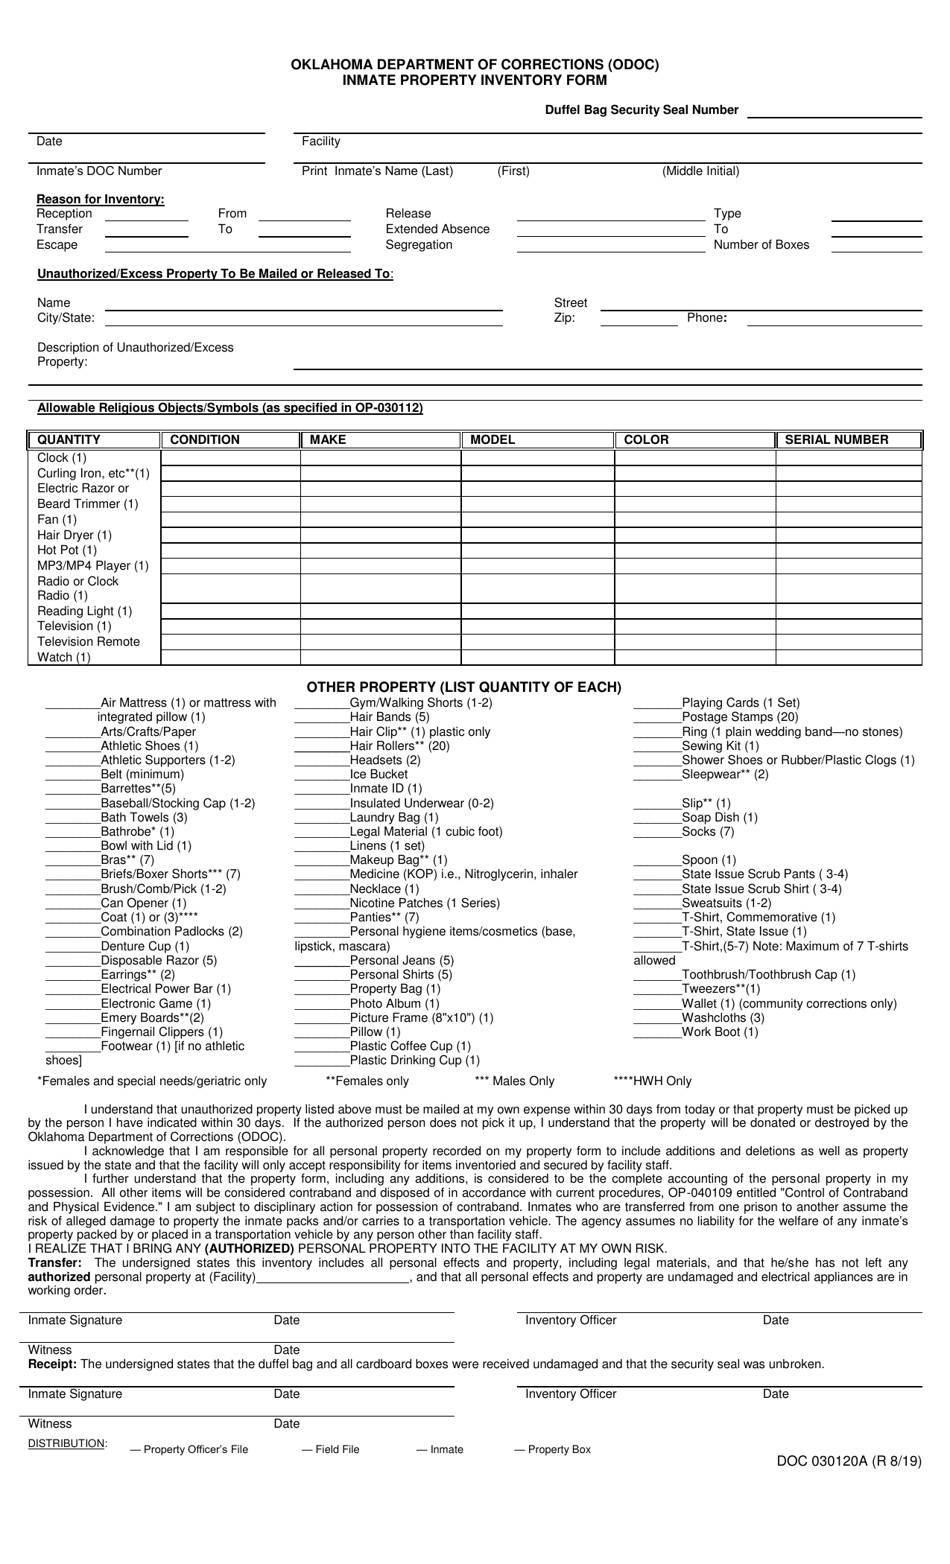 DOC Form 030120A Inmate Property Inventory Form - Oklahoma, Page 1